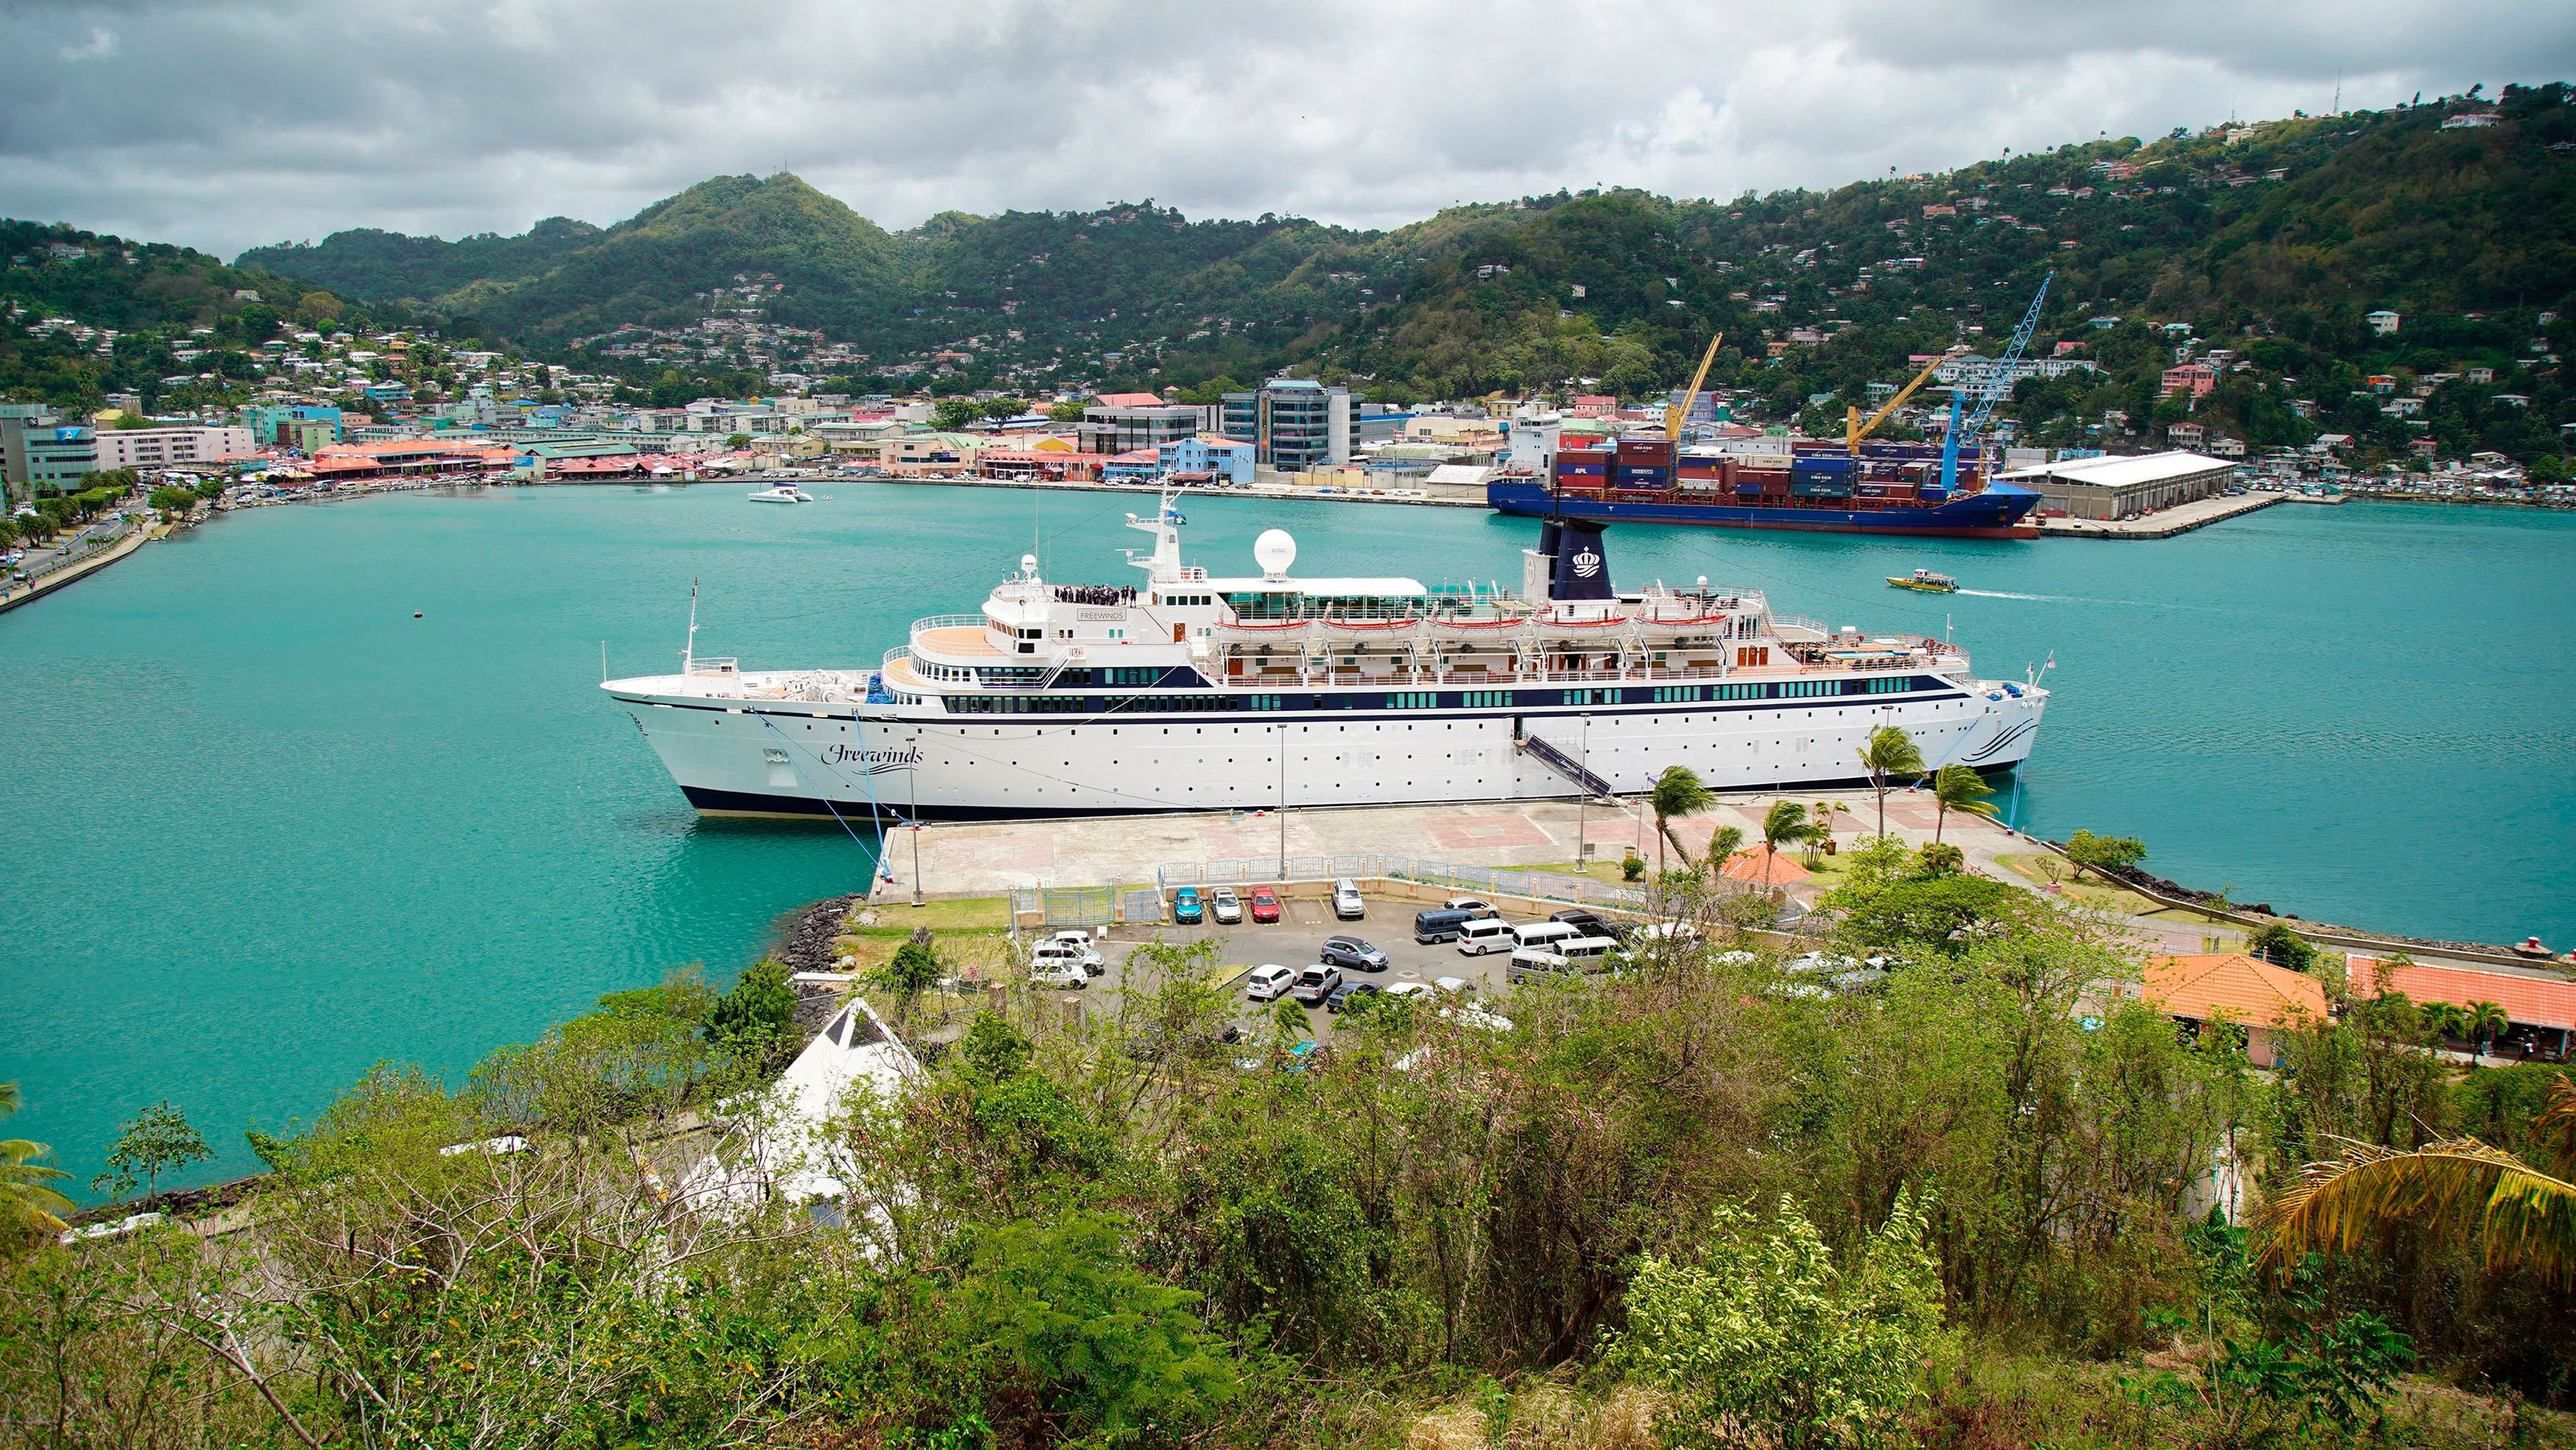 The Freewinds cruise ship is docked in the port of Castries, the capital of St. Lucia on May 2, 2019. Authorities in the eastern Caribbean island have quarantined the ship after discovering a confirmed case of measles aboard. (Bradley Lacan—AP/Shutterstock)